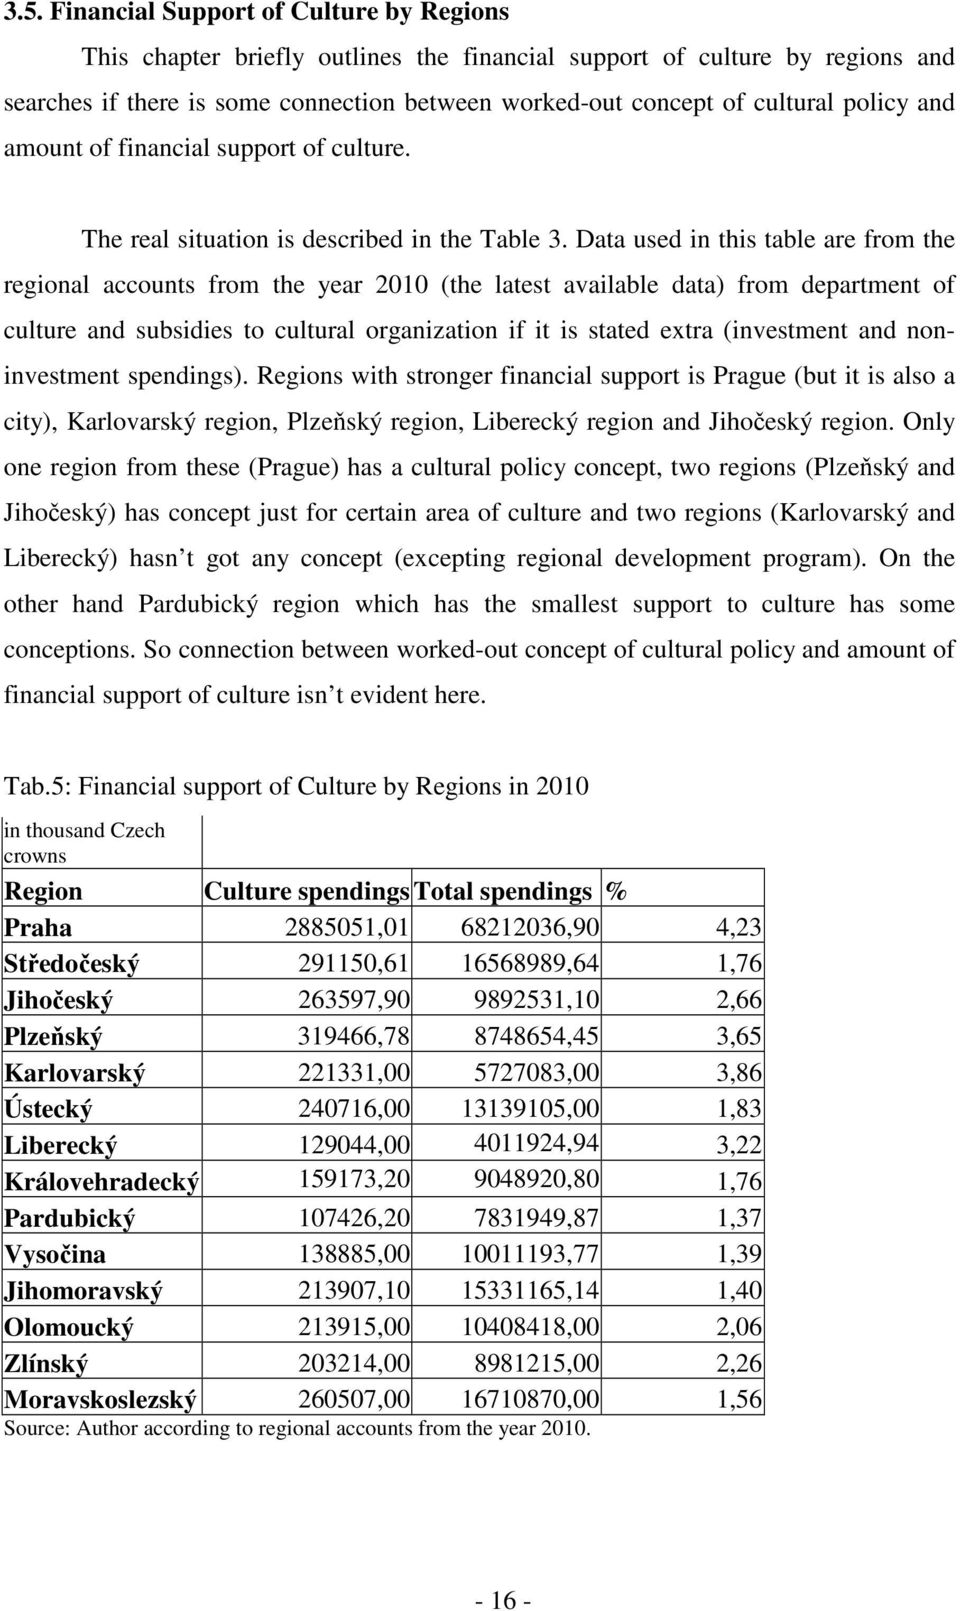 Data used in this table are from the regional accounts from the year 2010 (the latest available data) from department of culture and subsidies to cultural organization if it is stated extra